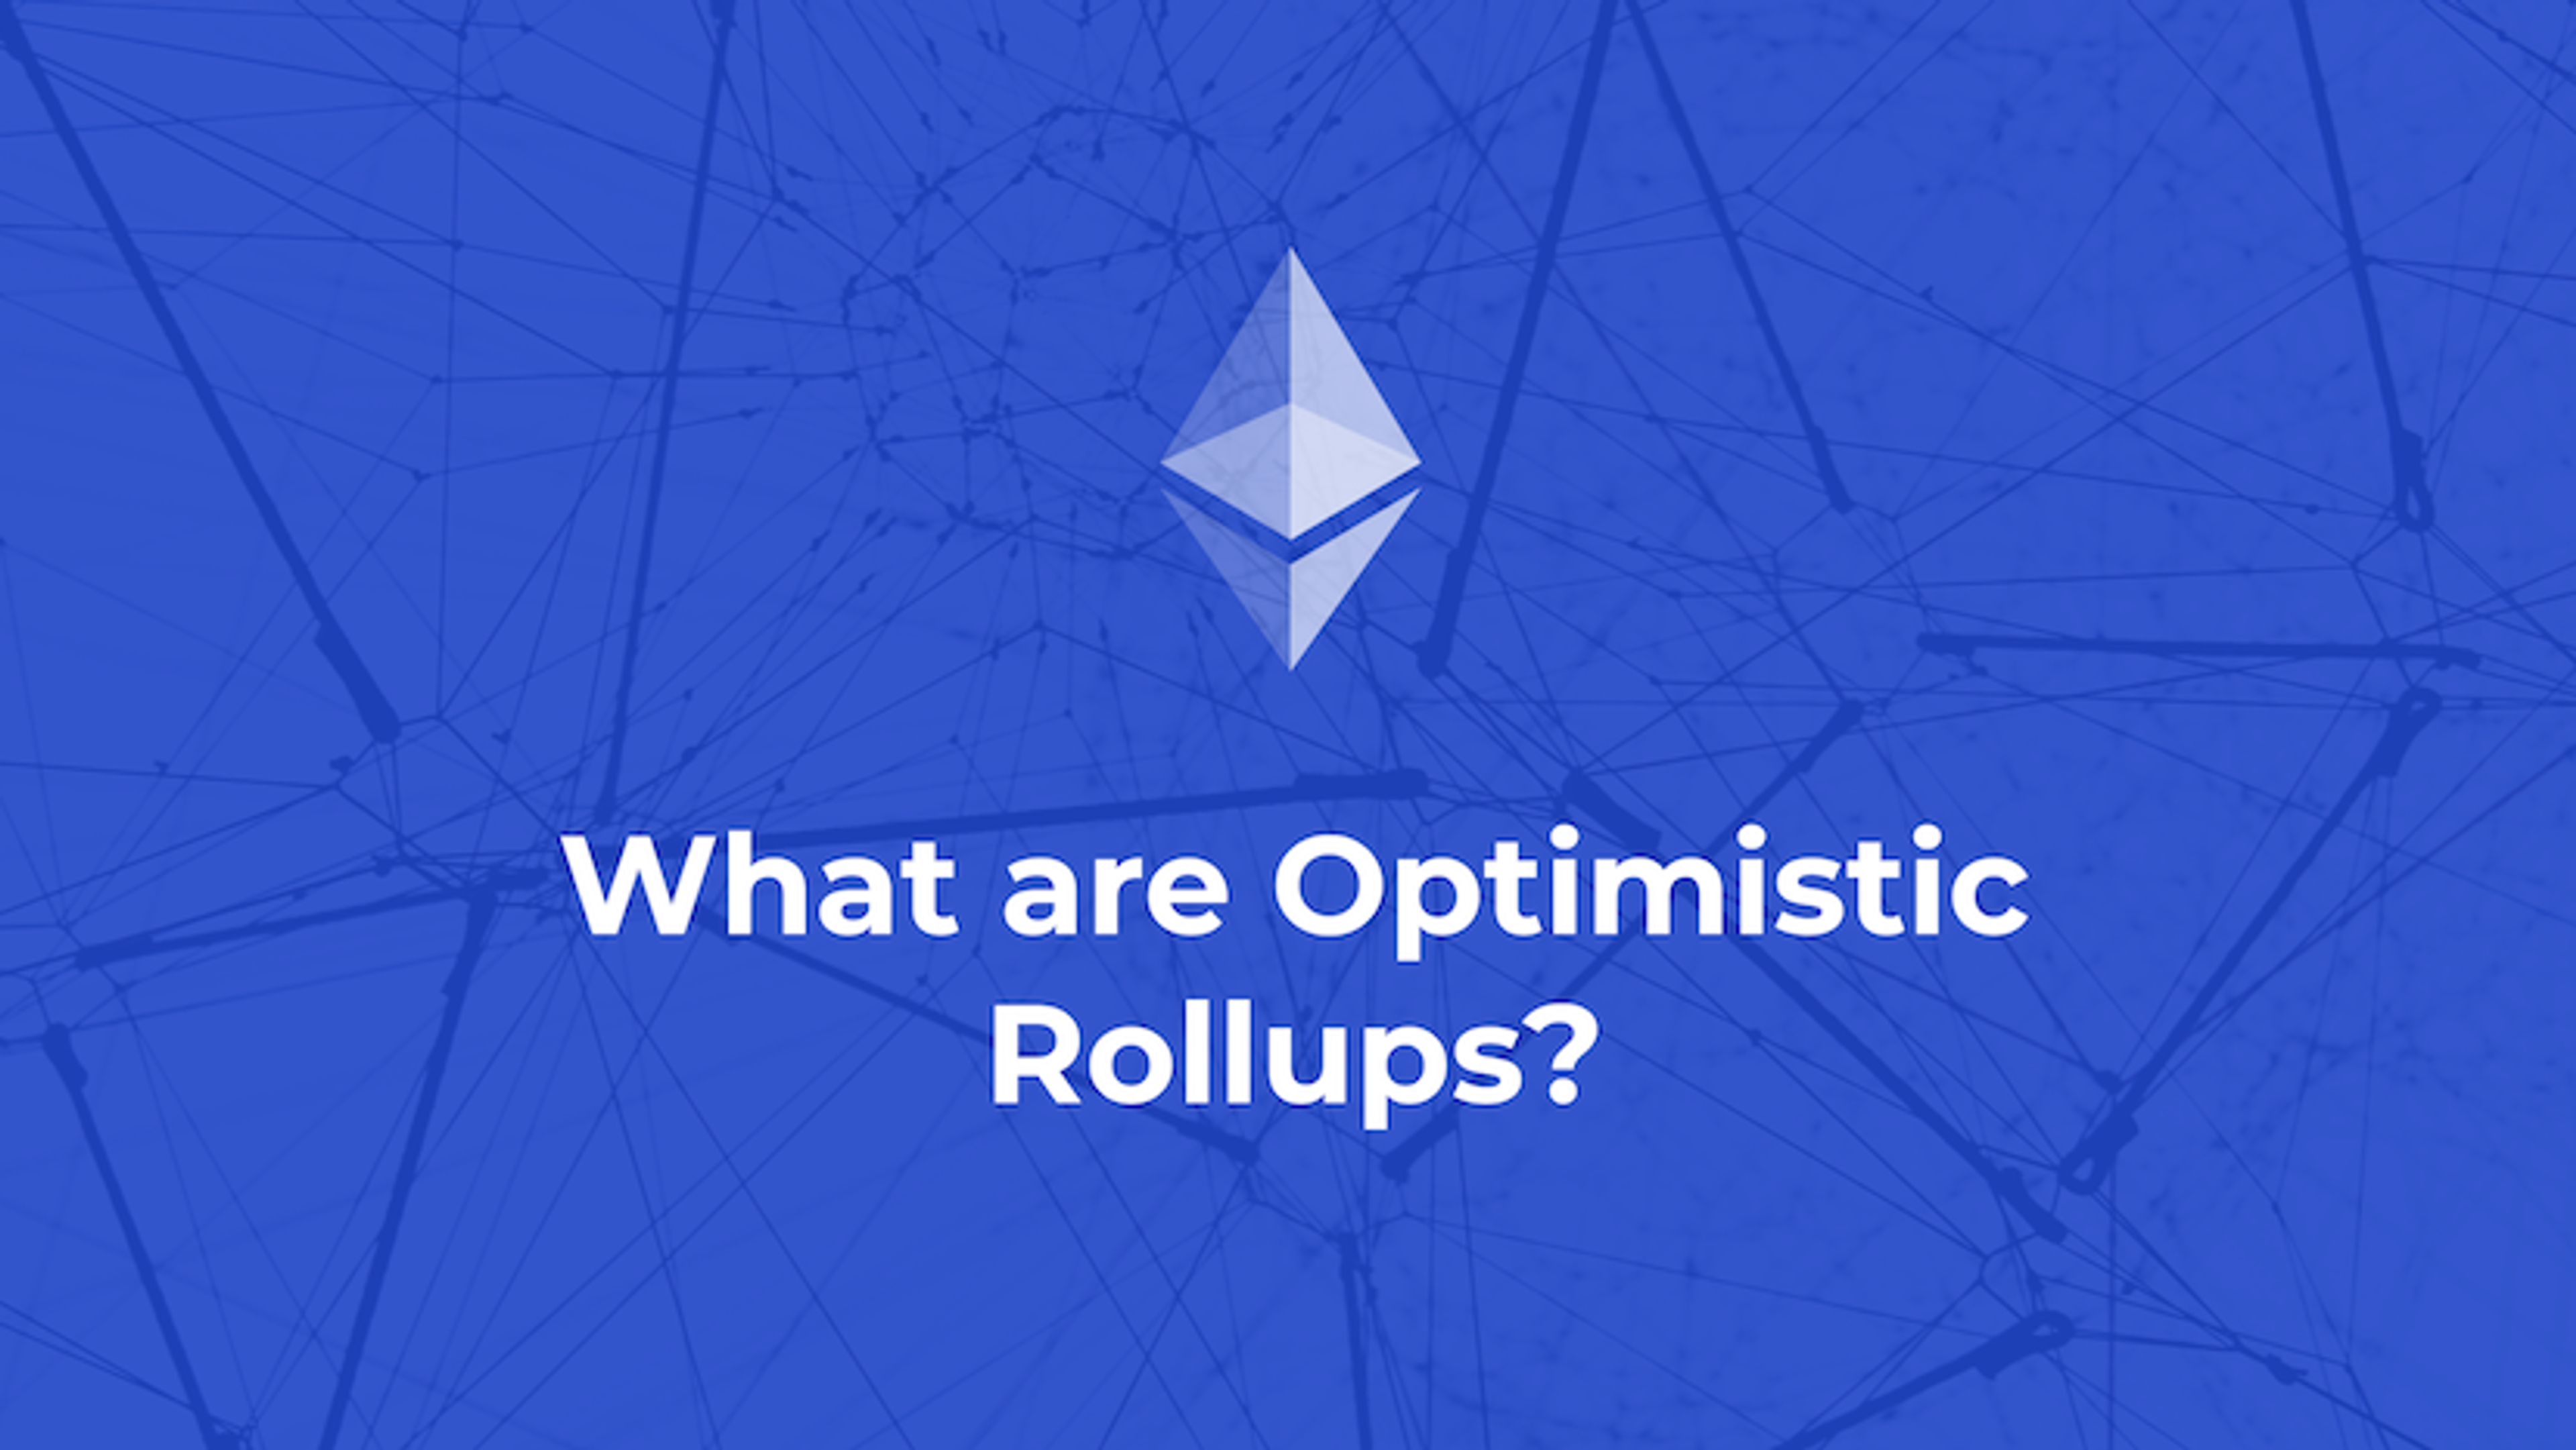 Optimistic Rollups: What Are They?